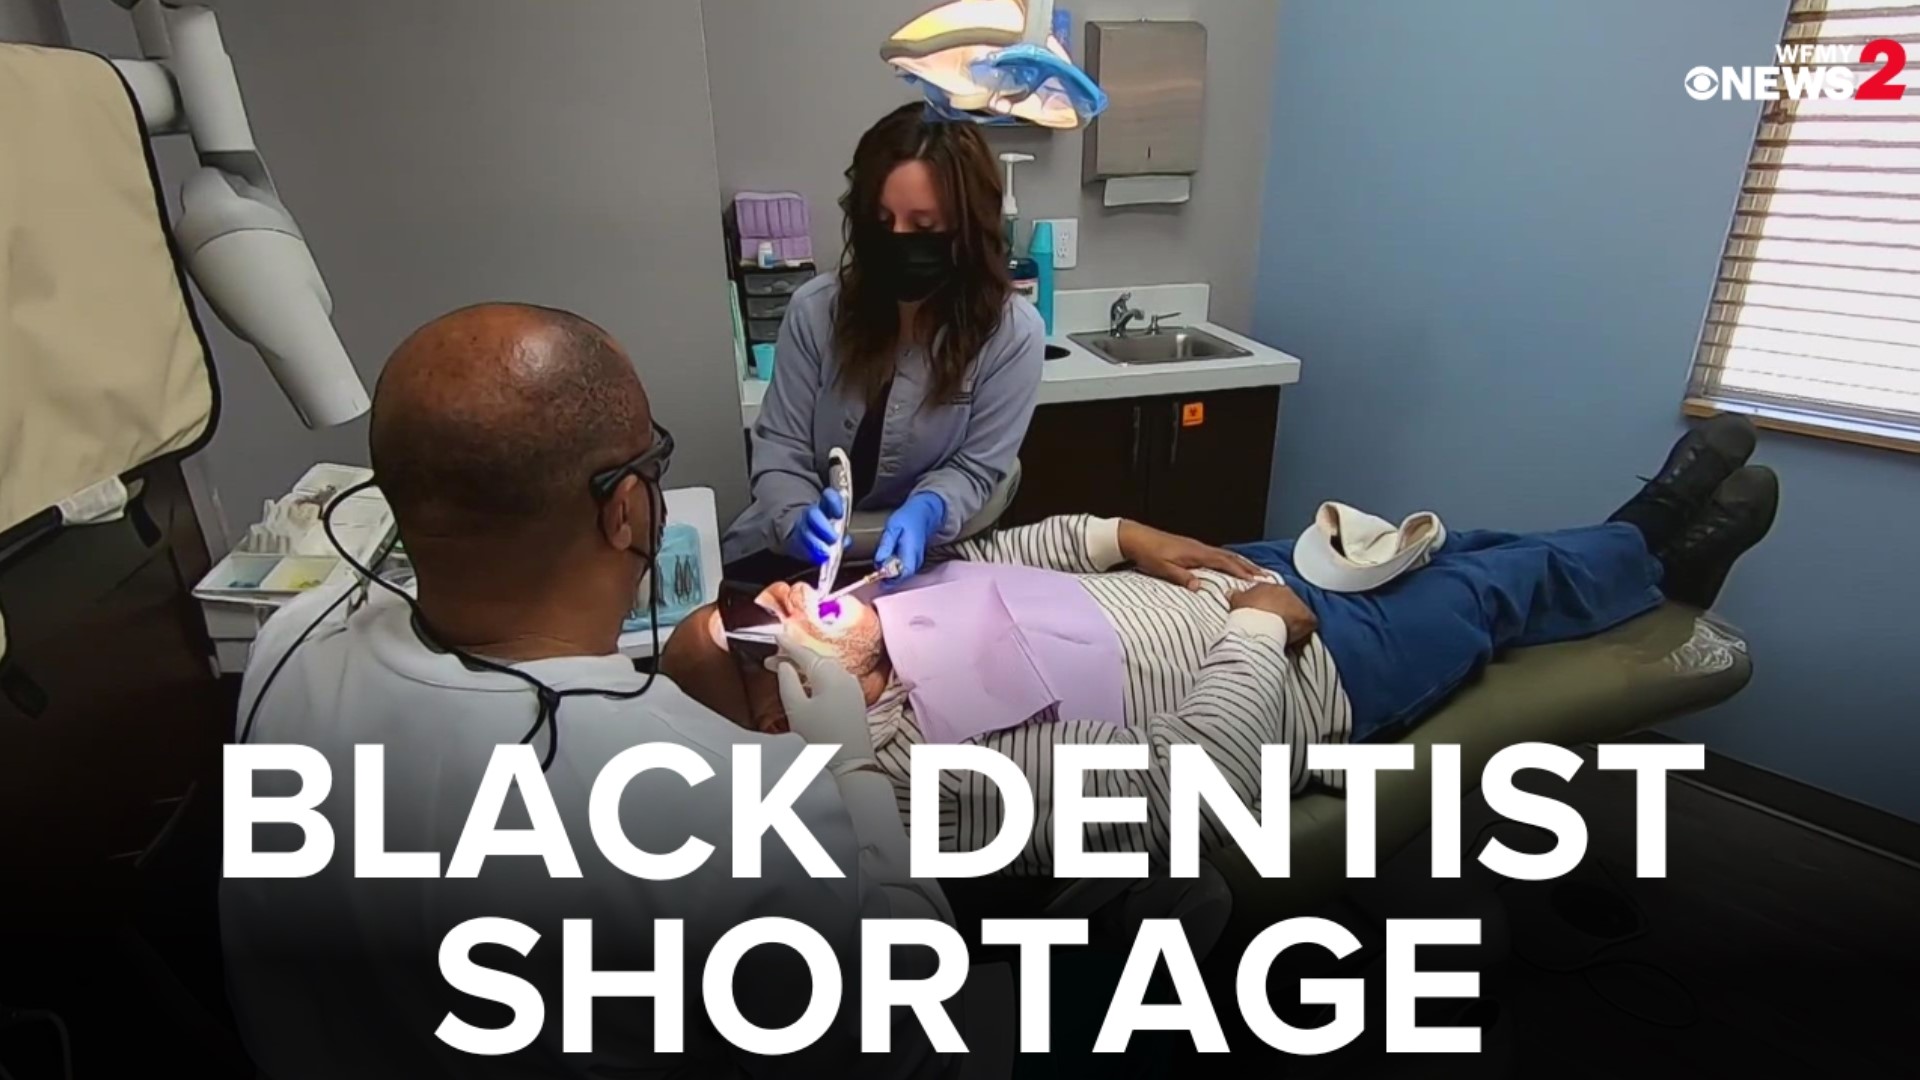 According to the American Dental Association, less than 4% of dentists in the U.S. are Black. A pair of dentists are on a mission to improve the numbers.